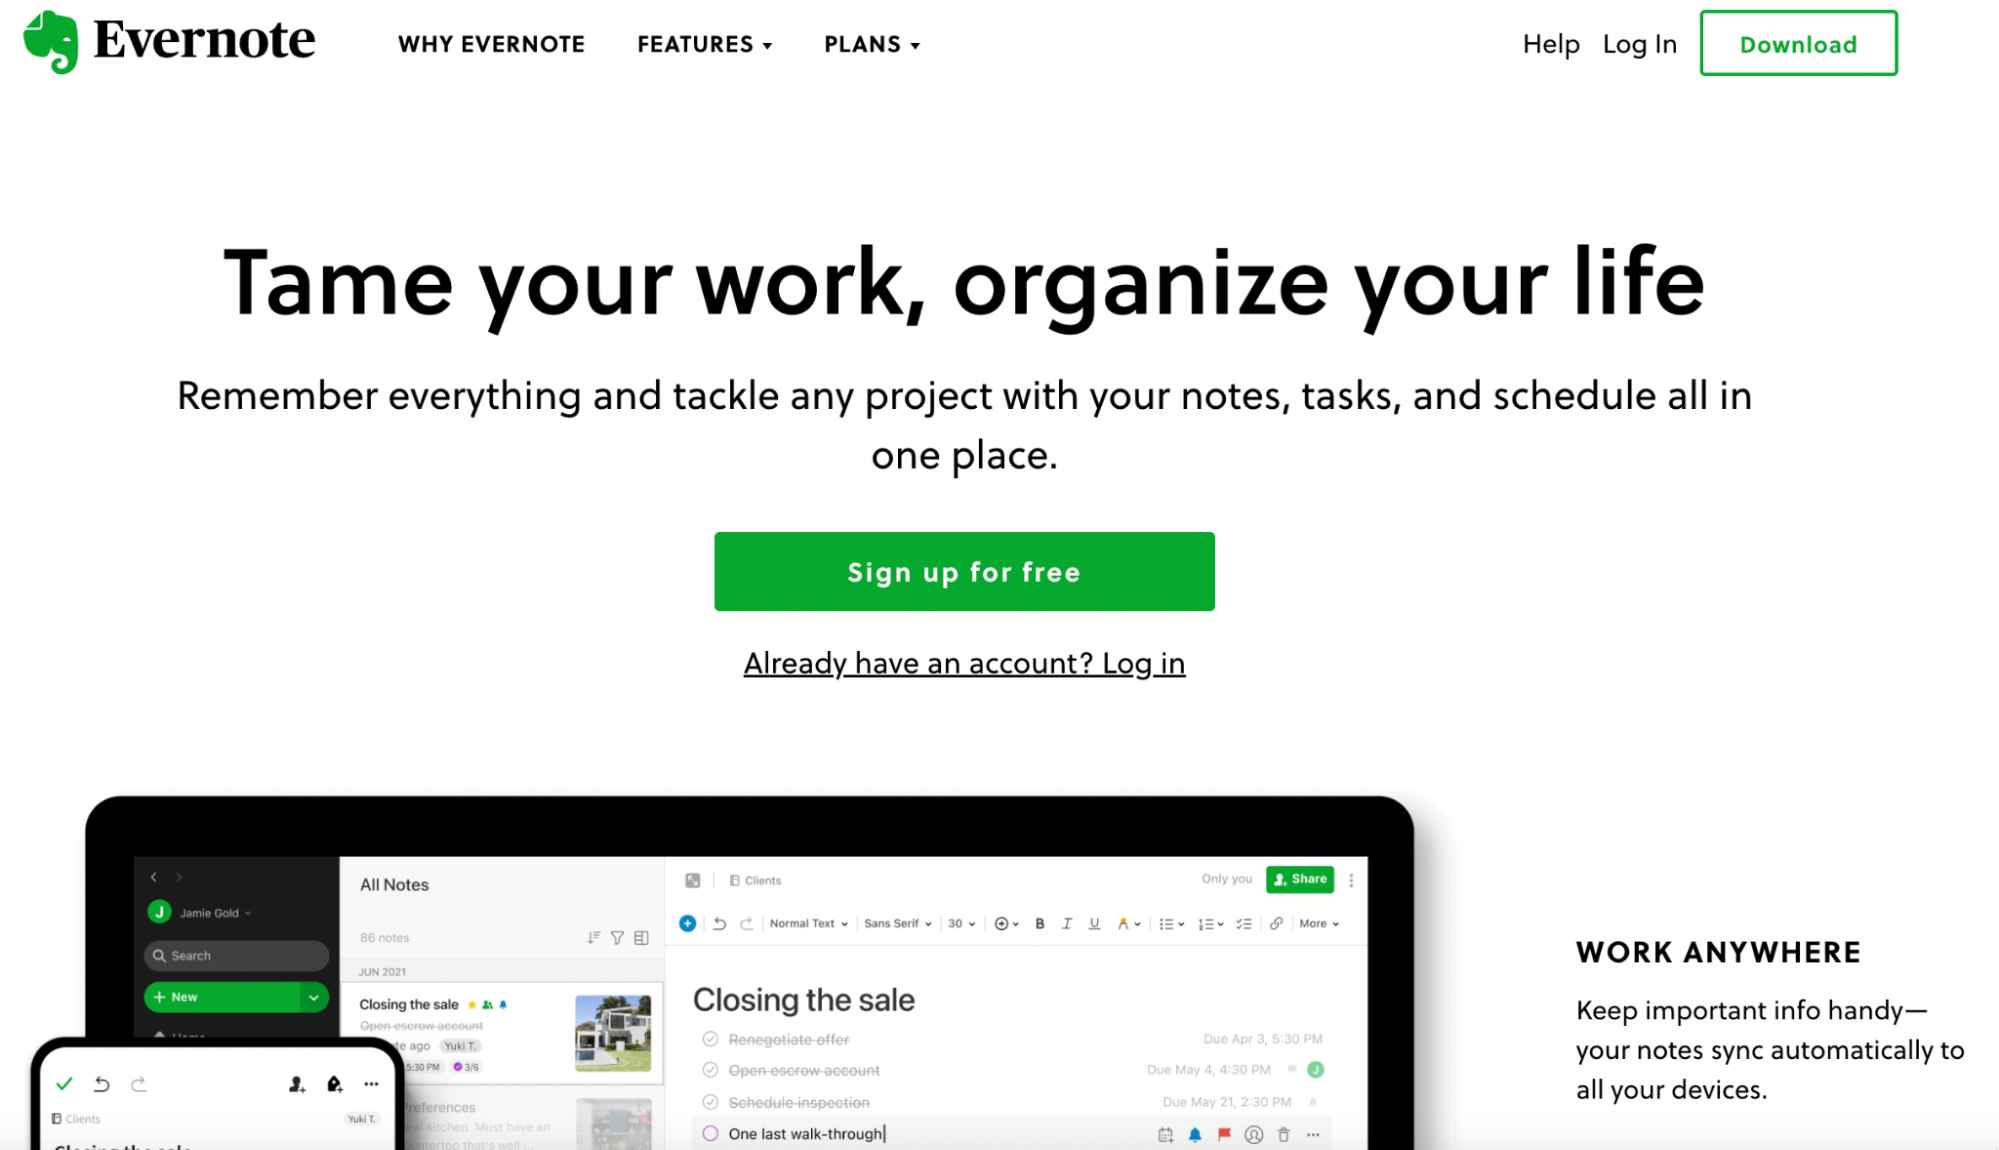 The homepage for Evernote